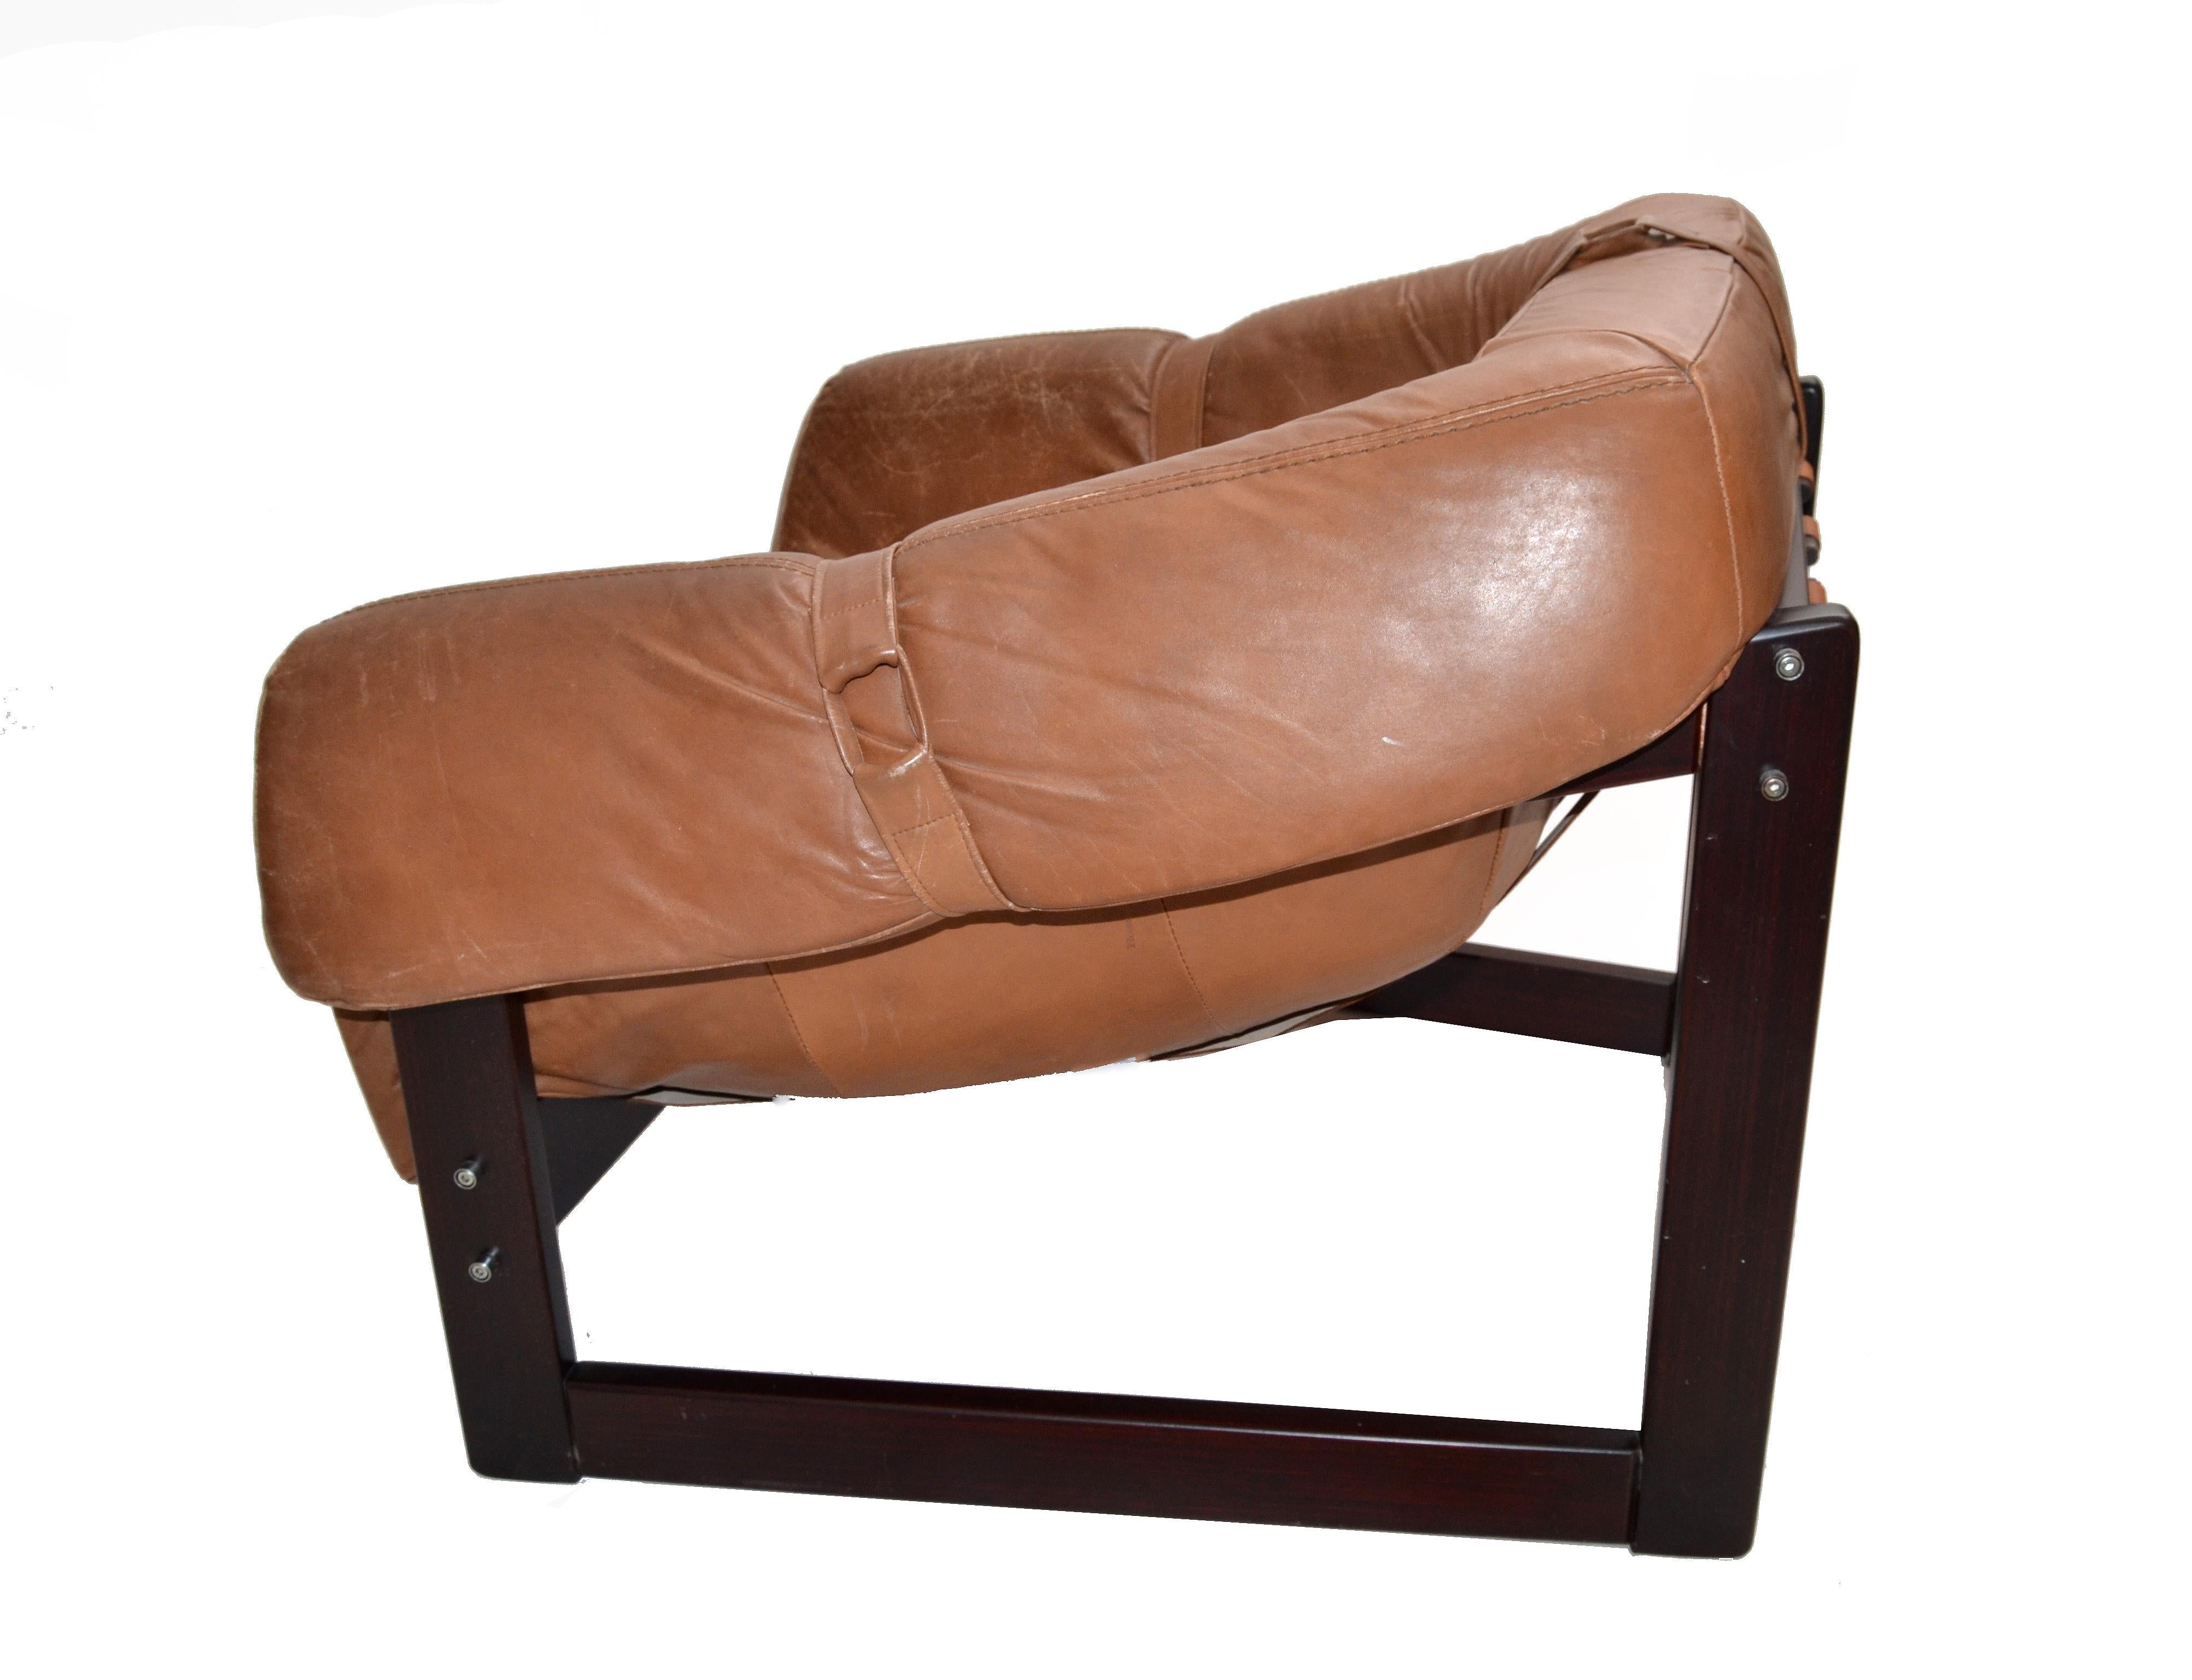 20th Century Percival Lafer Brazilian Rosewood & Leather Arm Lounge Chair Mid-Century Modern